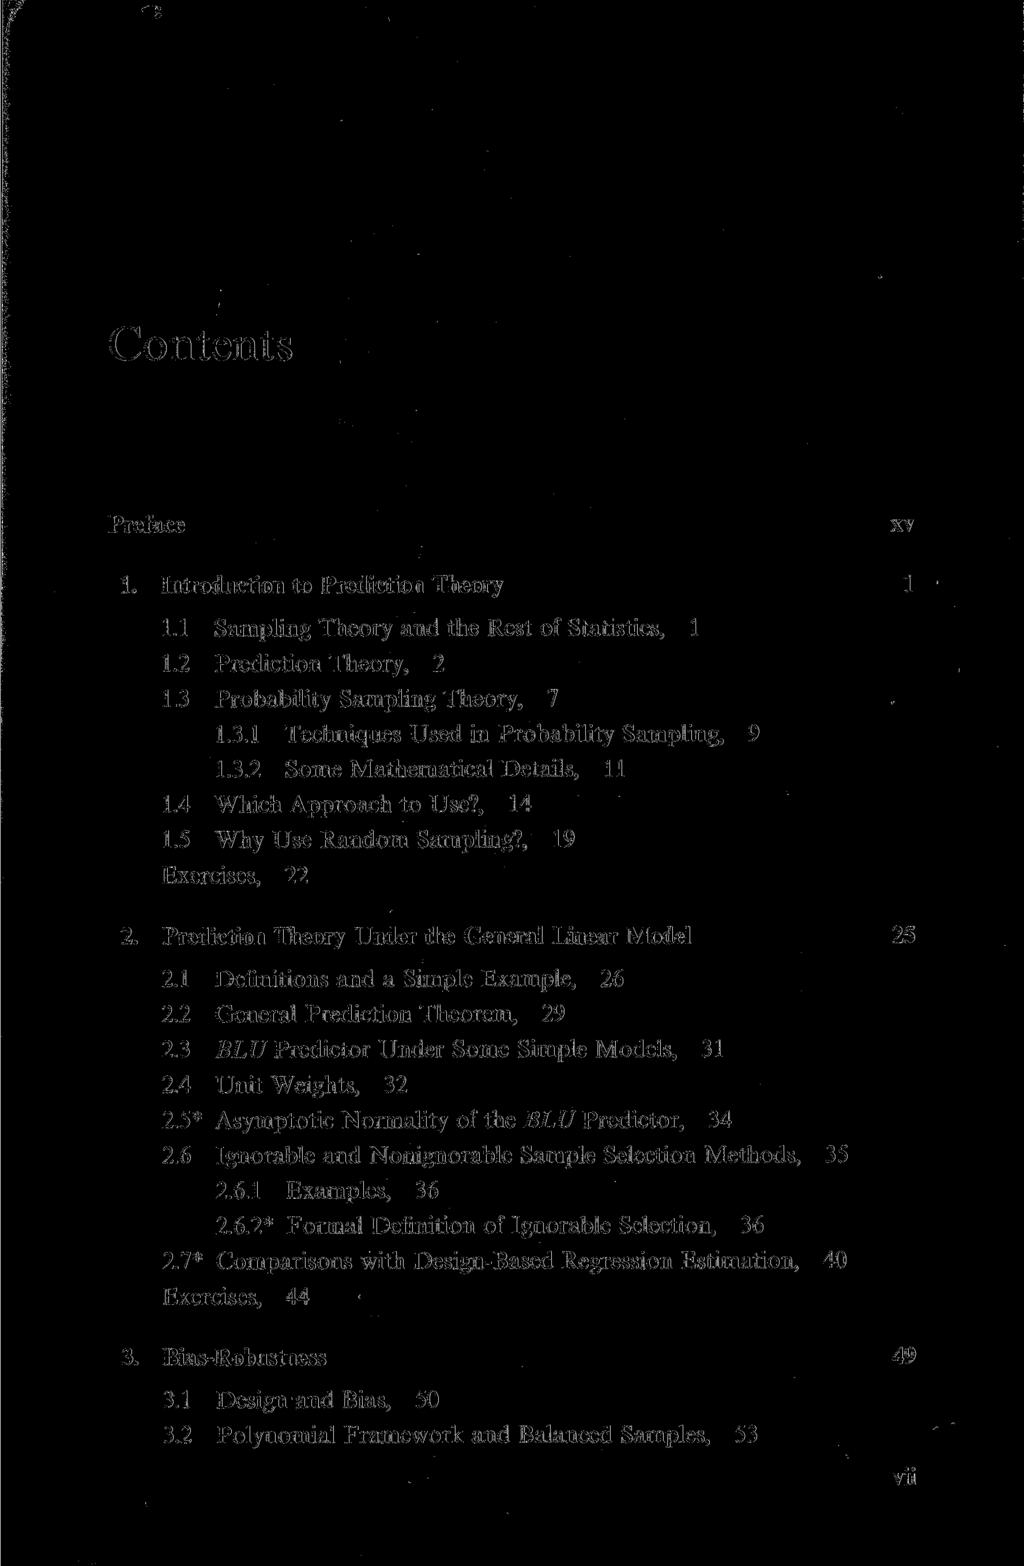 Contents Preface 1. Introduction to Prediction Theory 1.1 Sampling Theory and the Rest of Statistics, 1 1.2 Prediction Theory, 2 1.3 Probability Sampling Theory, 7 1.3.1 Techniques Used in Probability Sampling, 9 1.